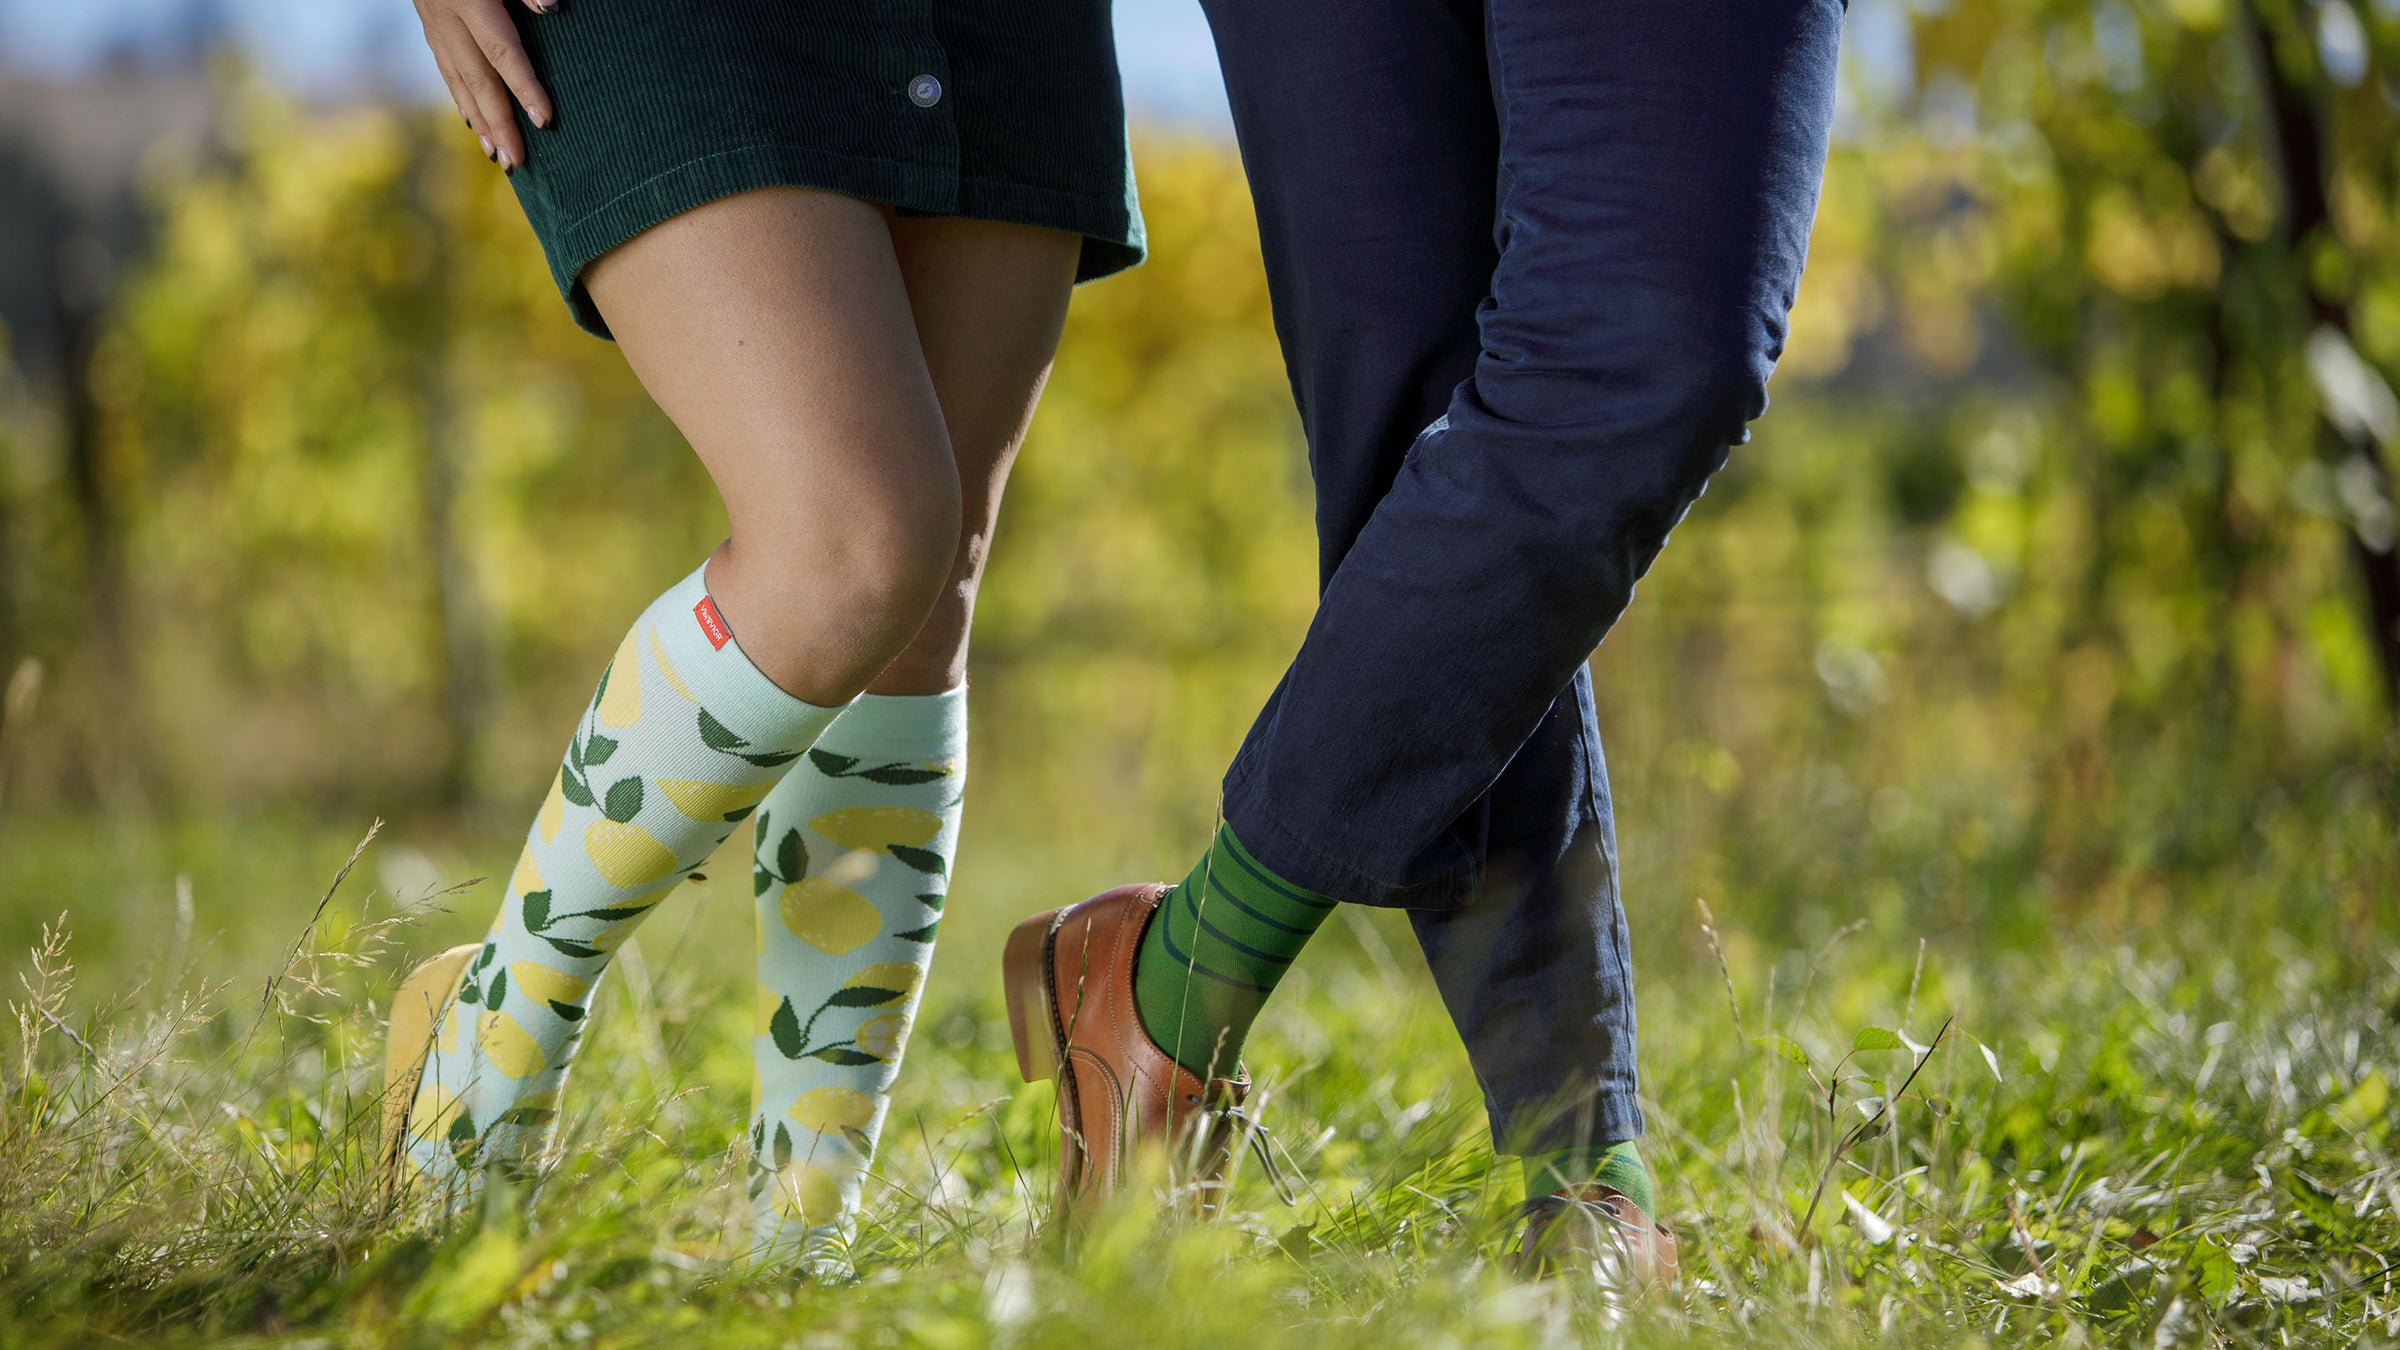 Man and Woman with POTS wearing compression socks